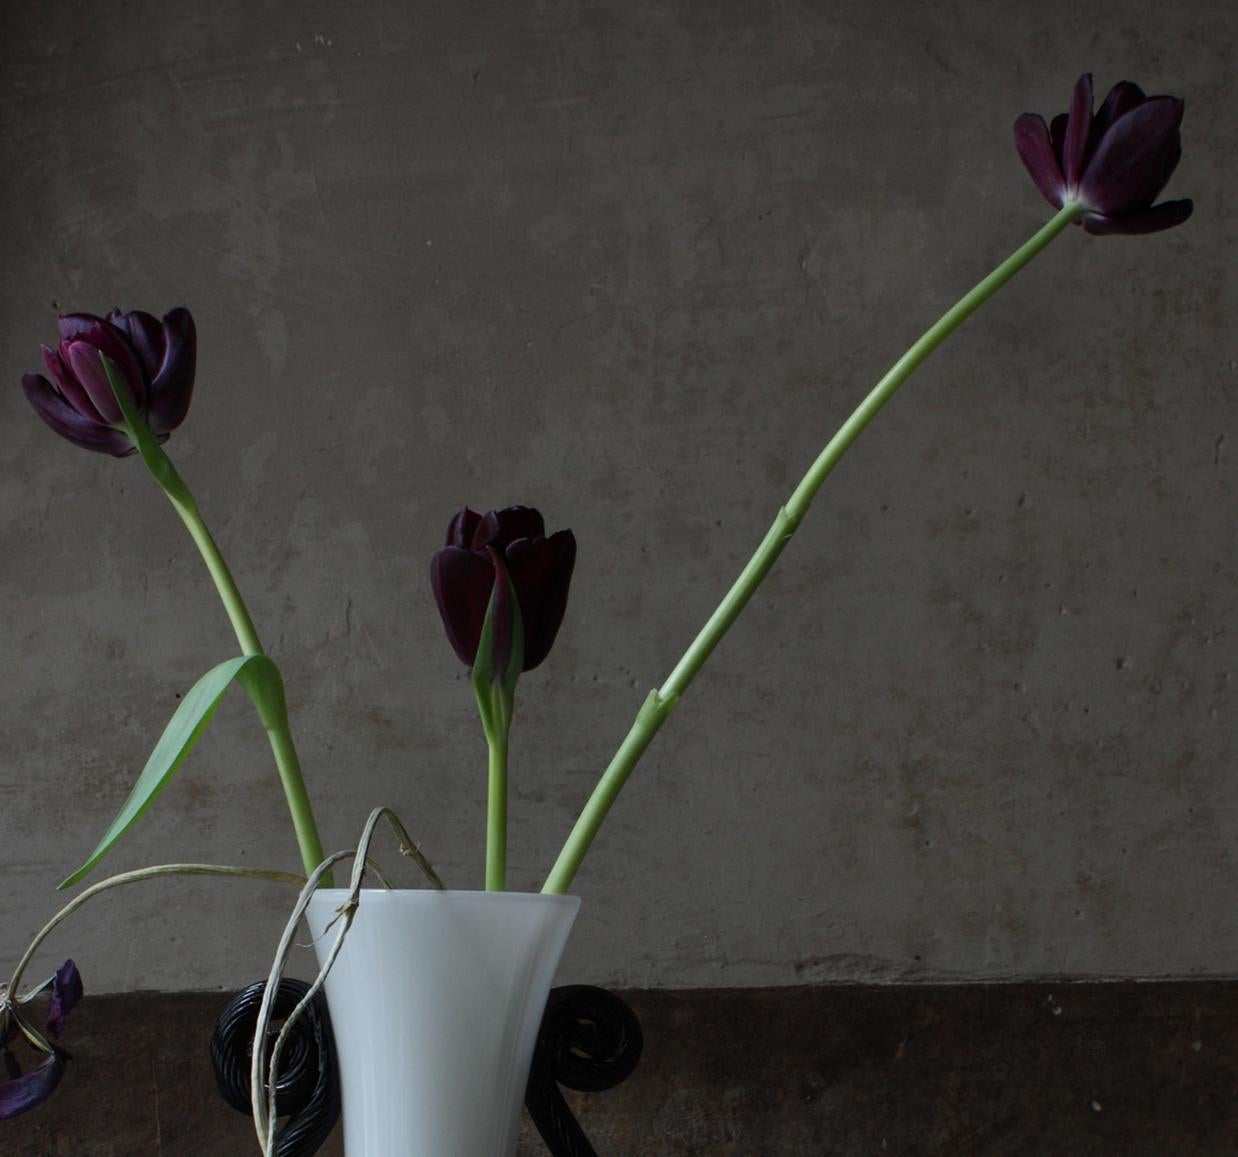 Still life with Tulips, and a Pale Blue  Opalina Vase, Antwerp. Color photograph - Photograph by Michael James O’Brien